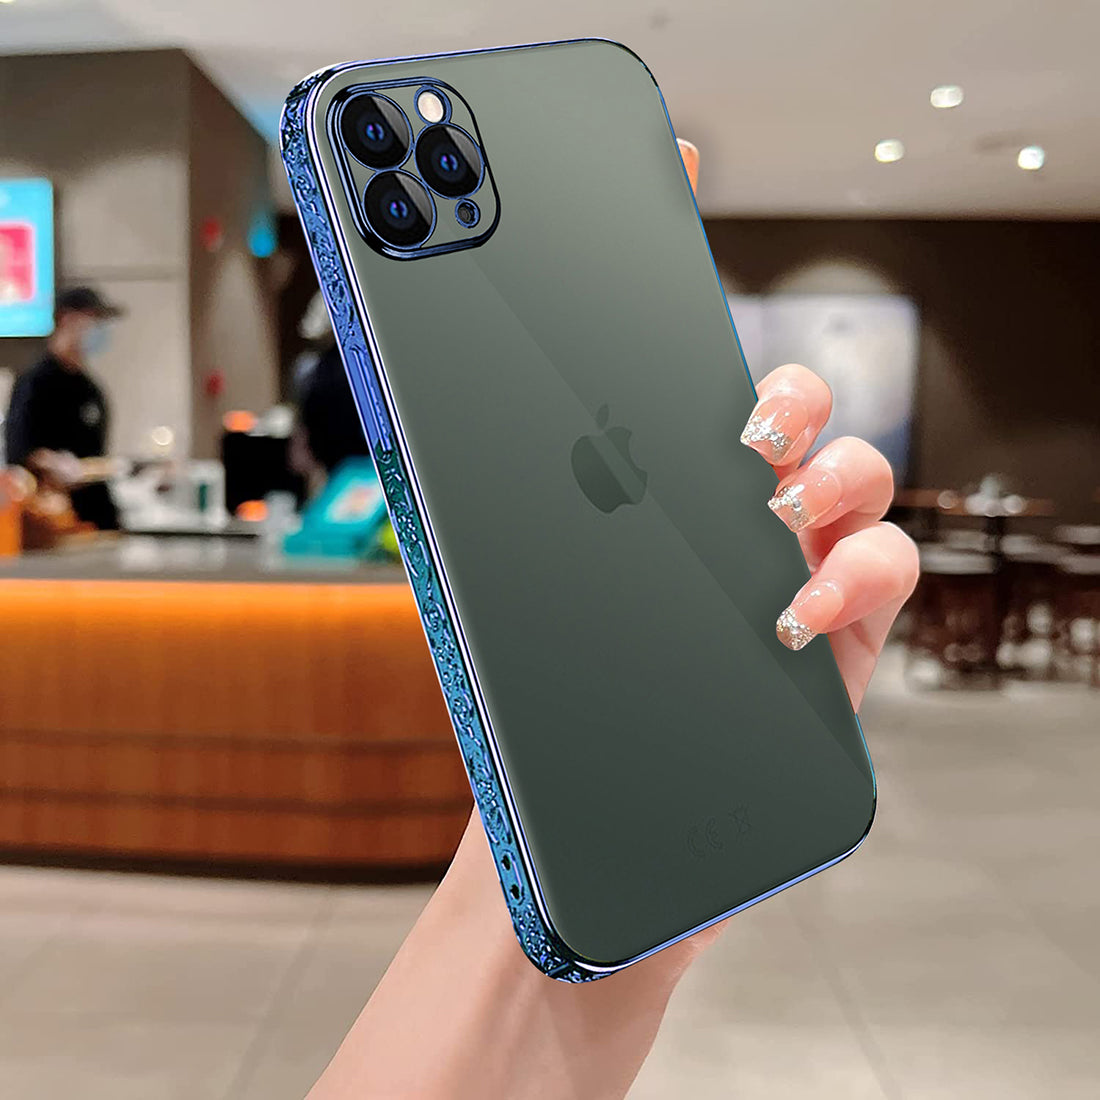 Camera Protection Bumper Cover for Apple iPhone 11 Pro